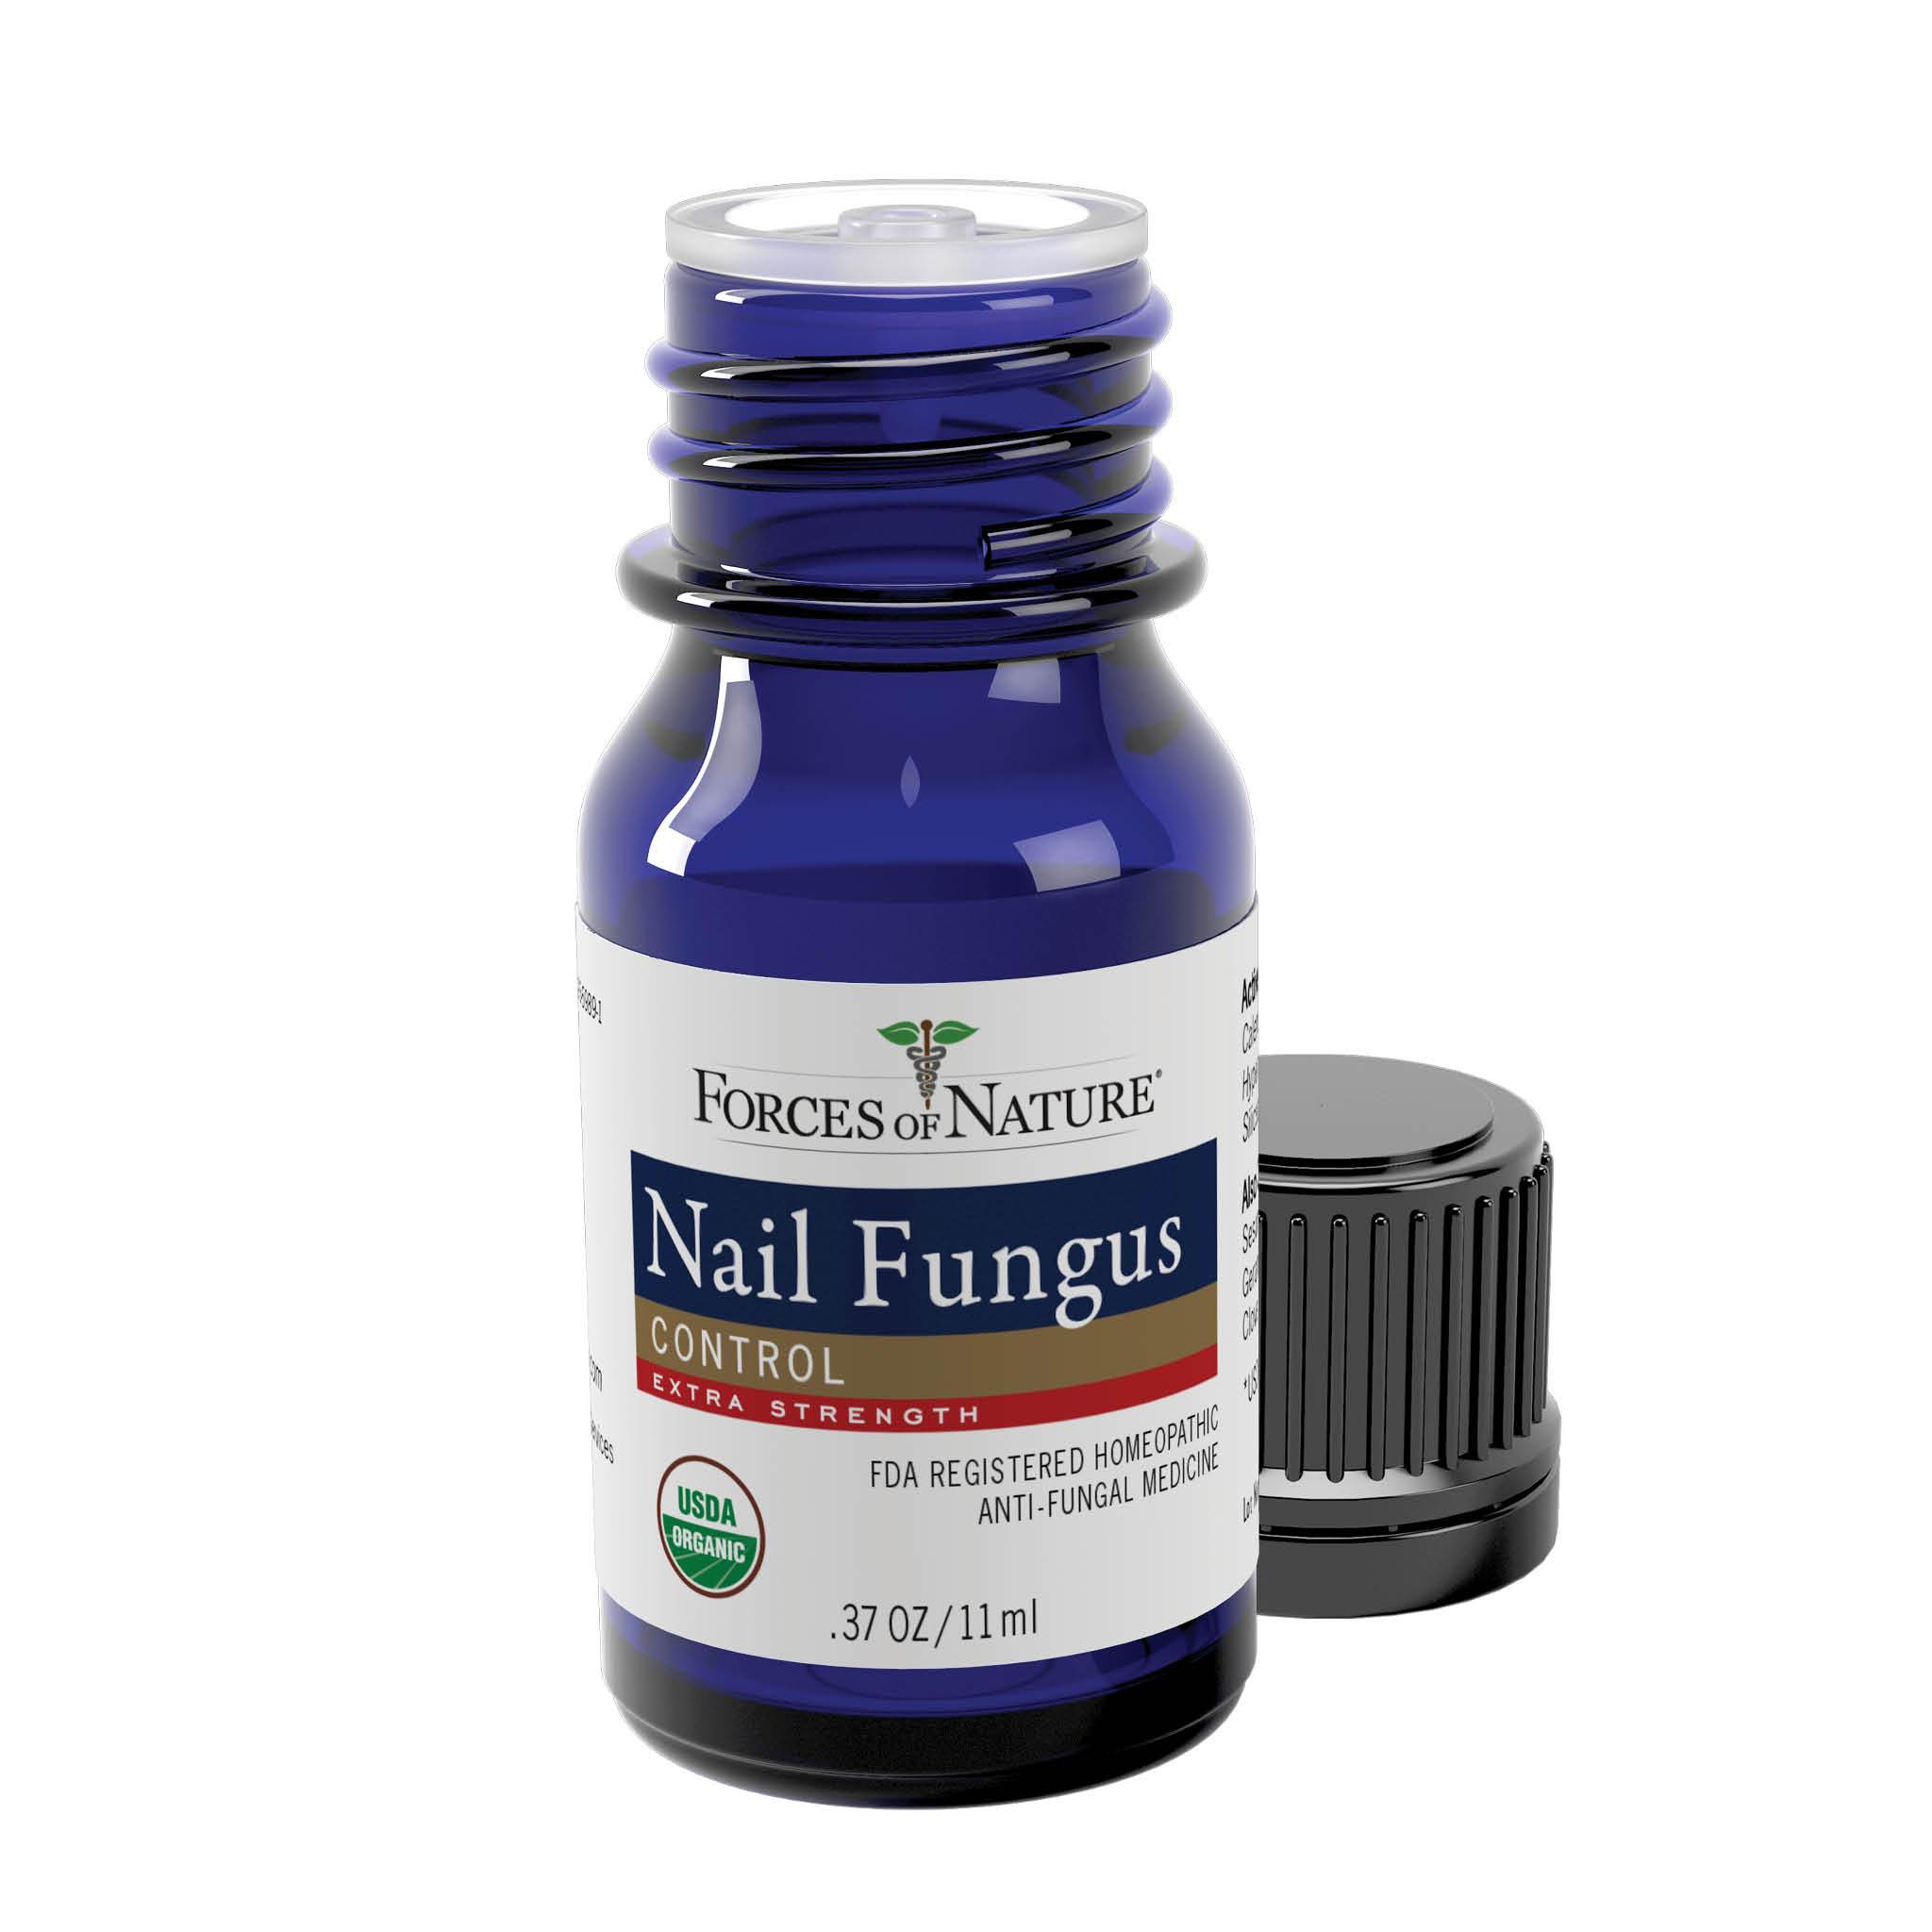 Laser Nail Fungus Therapy At Home | Best Way To Get Rid of Toe Fungus